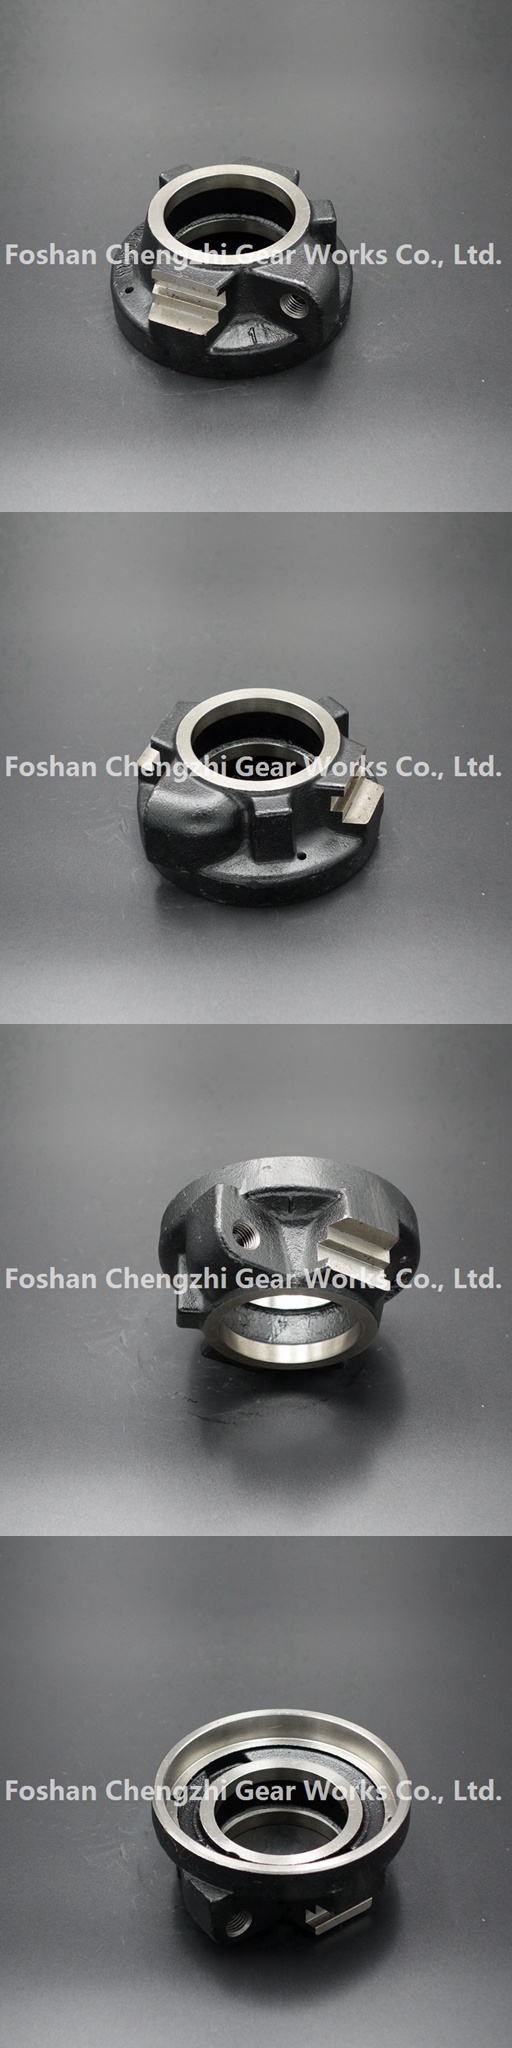 Customized Nonstandard Casting Transmission Parts for Agricultural Machinery